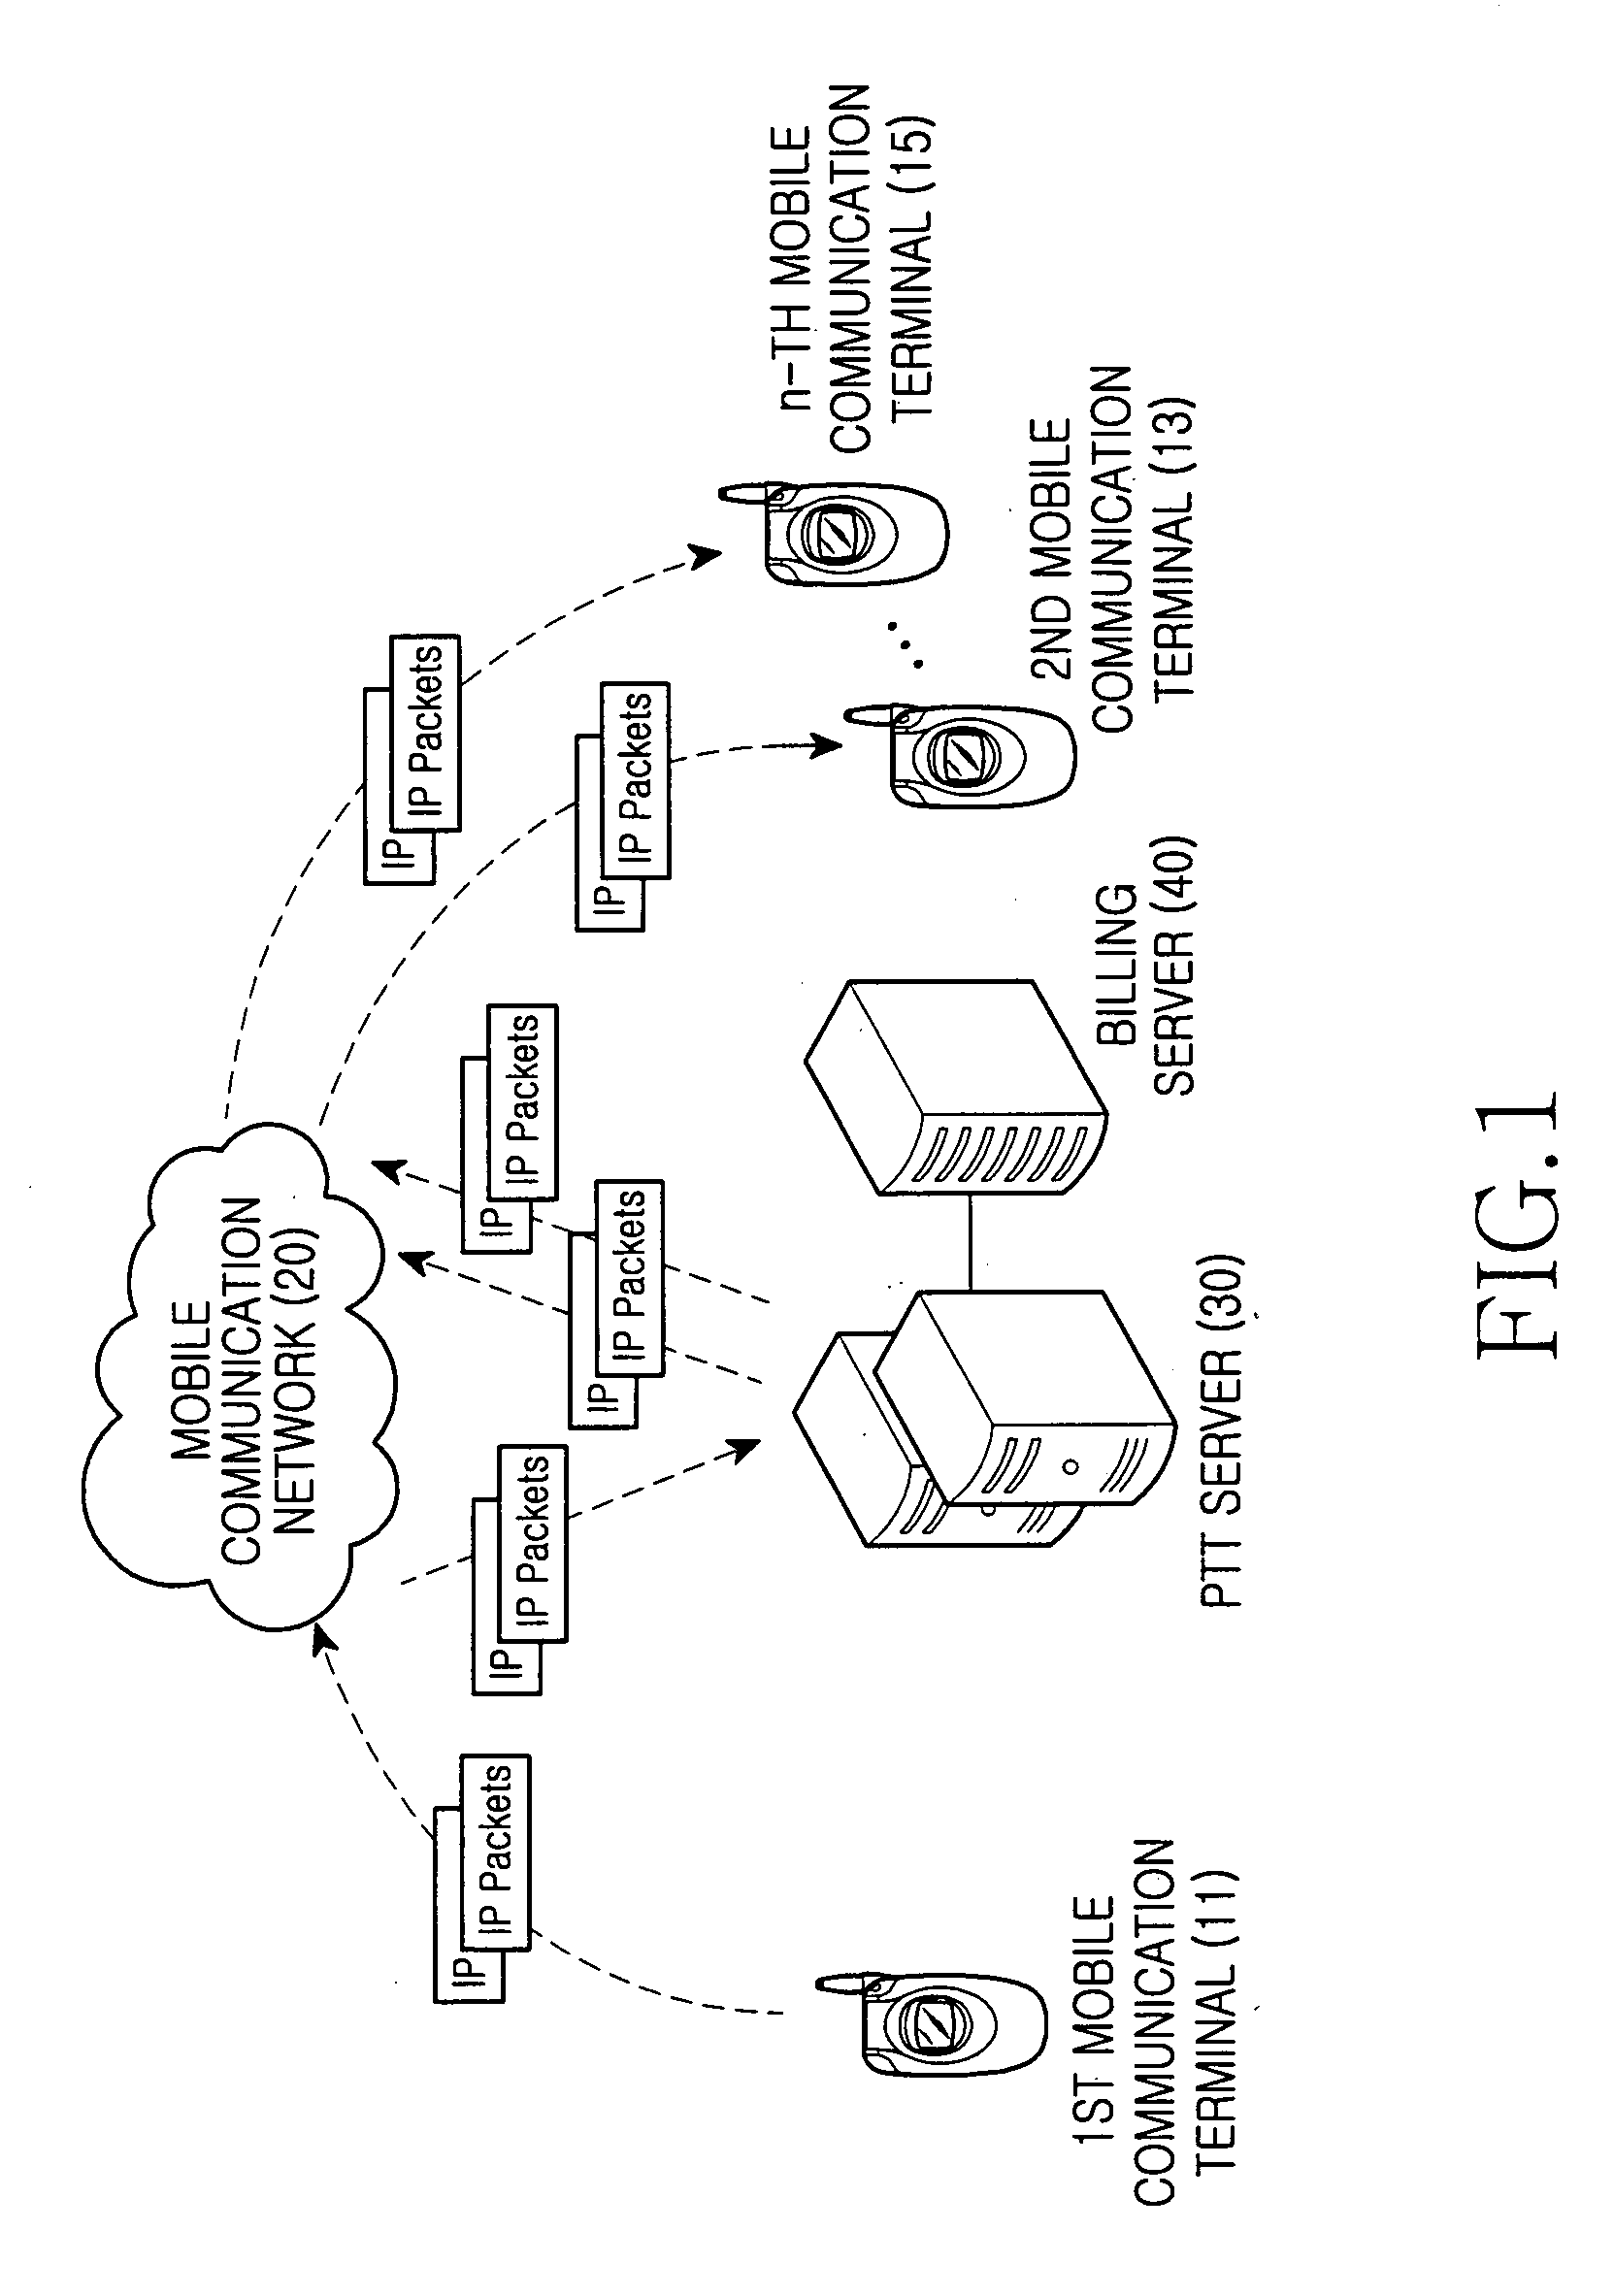 Method and system for automatically updating user information in a push-to-talk system